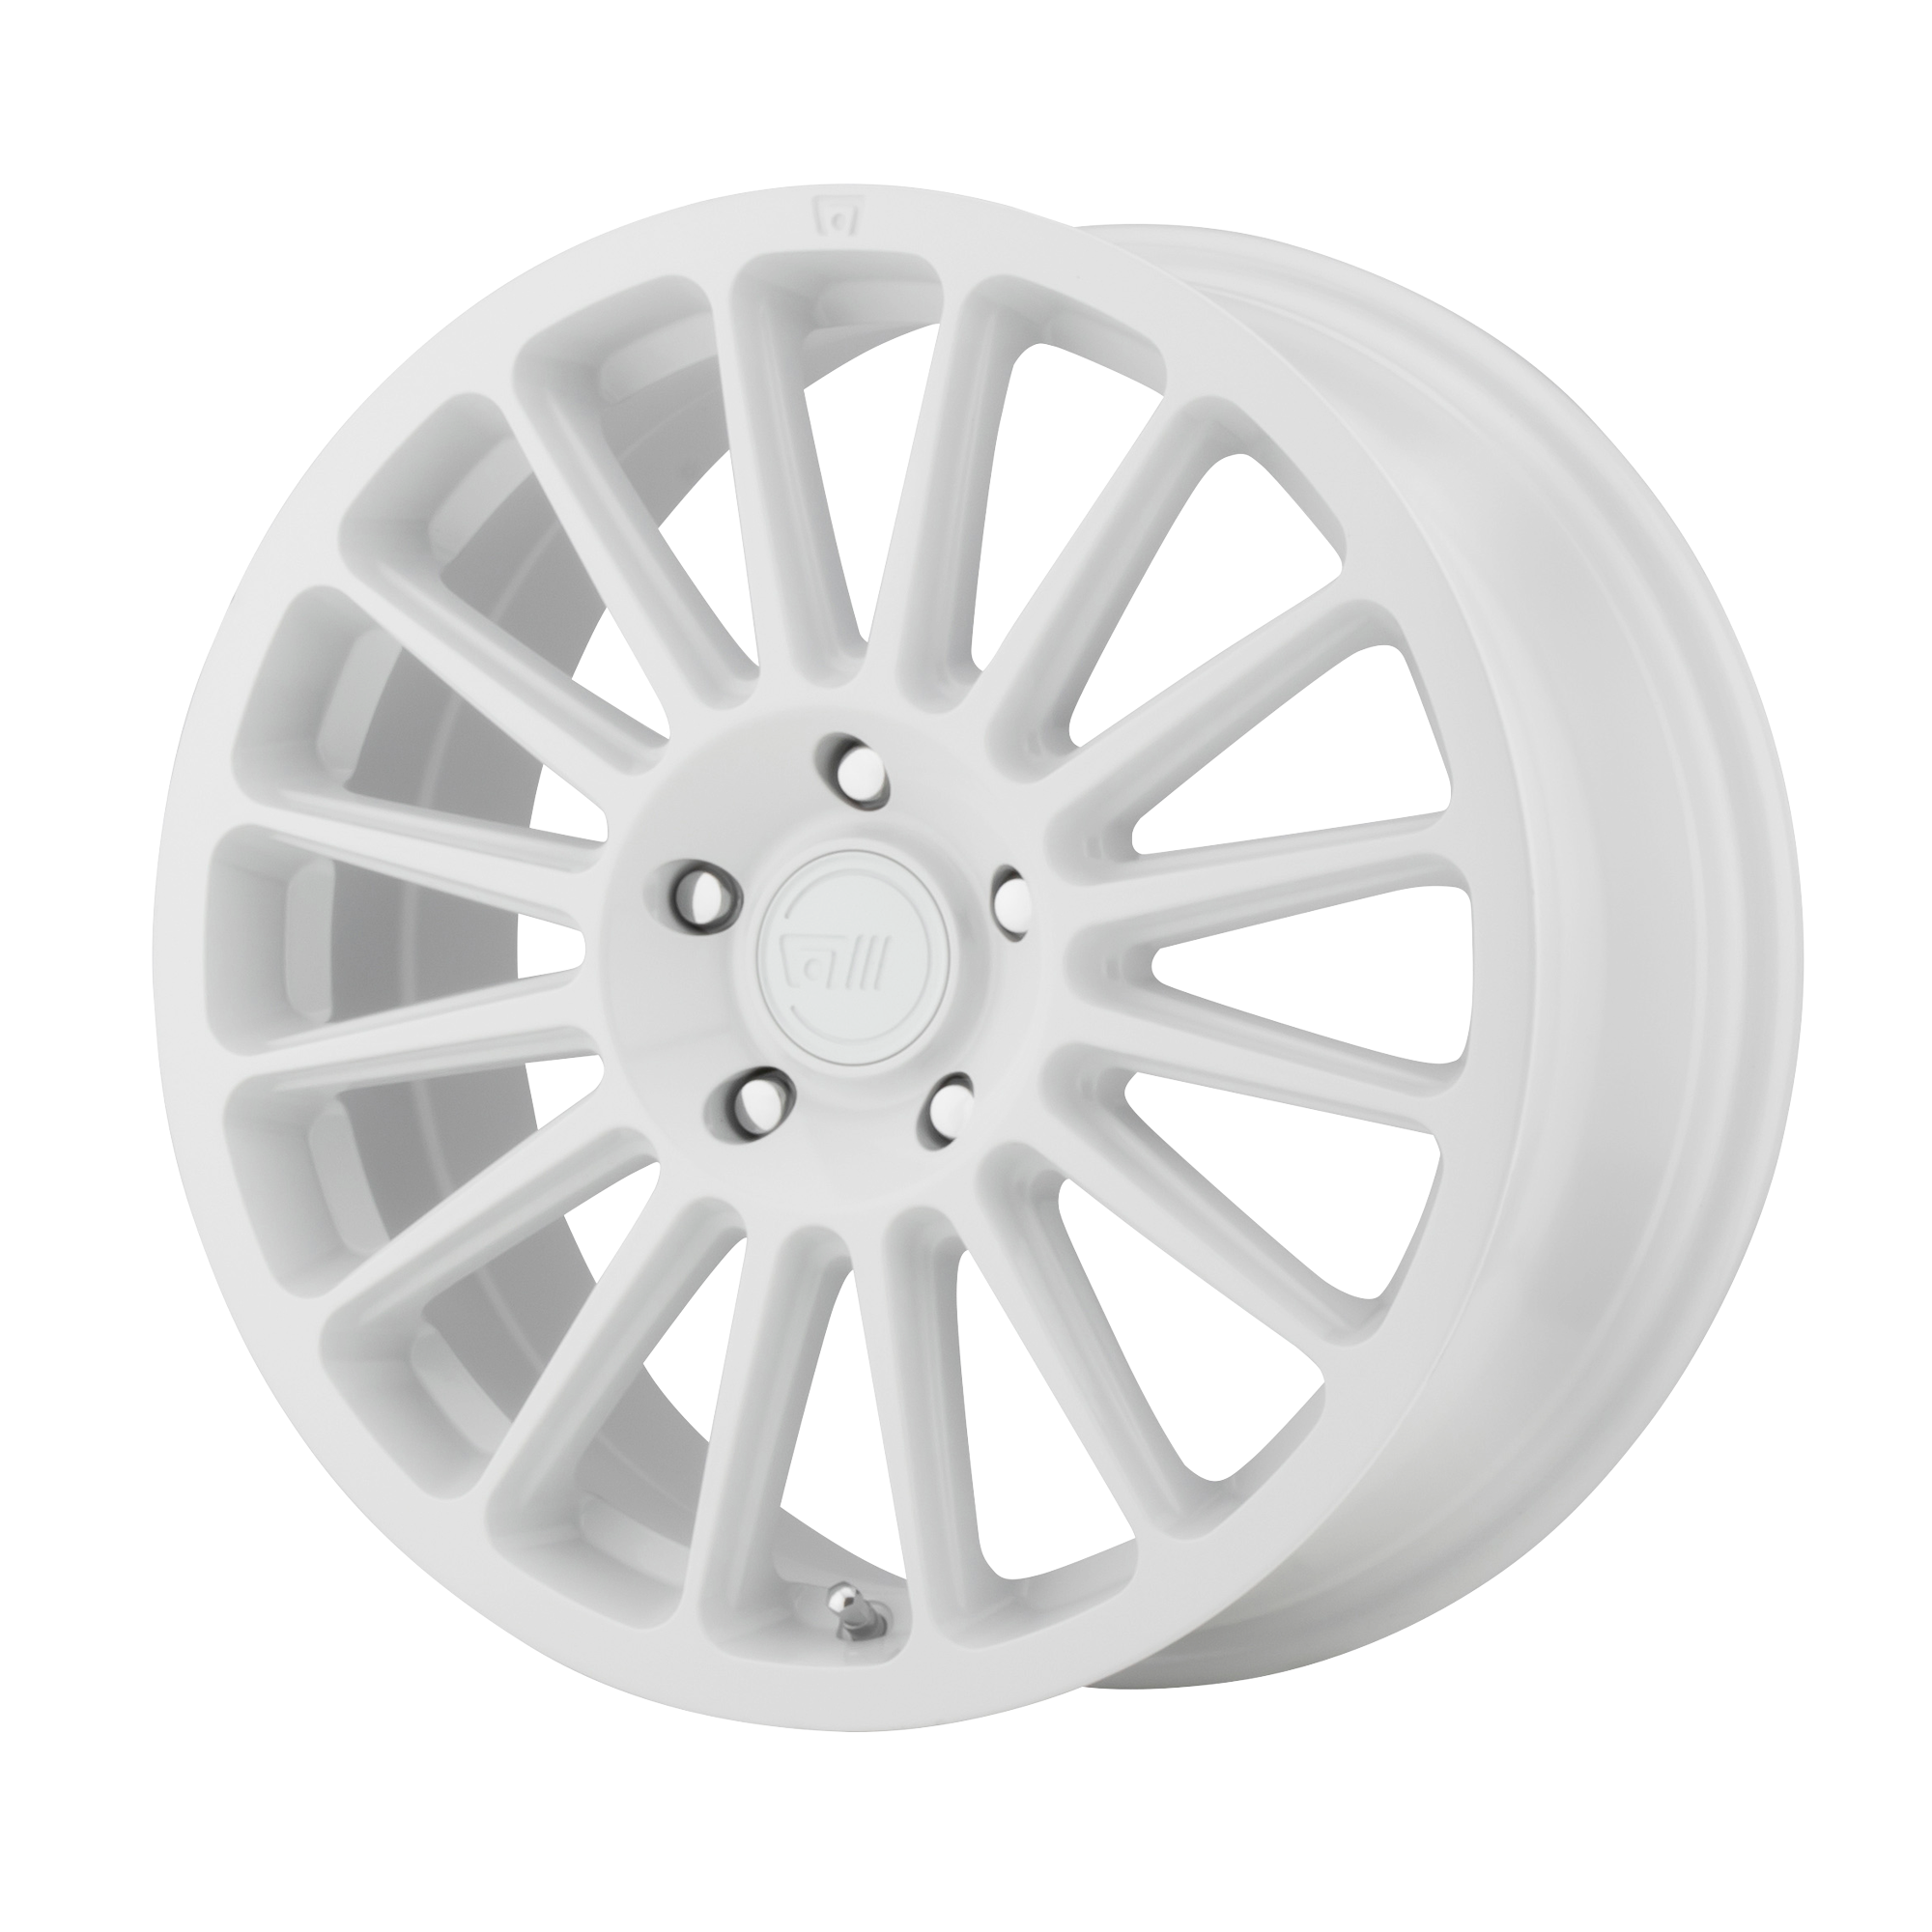 MR141 16x7.5 5x114.30 WHITE (40 mm) - Tires and Engine Performance